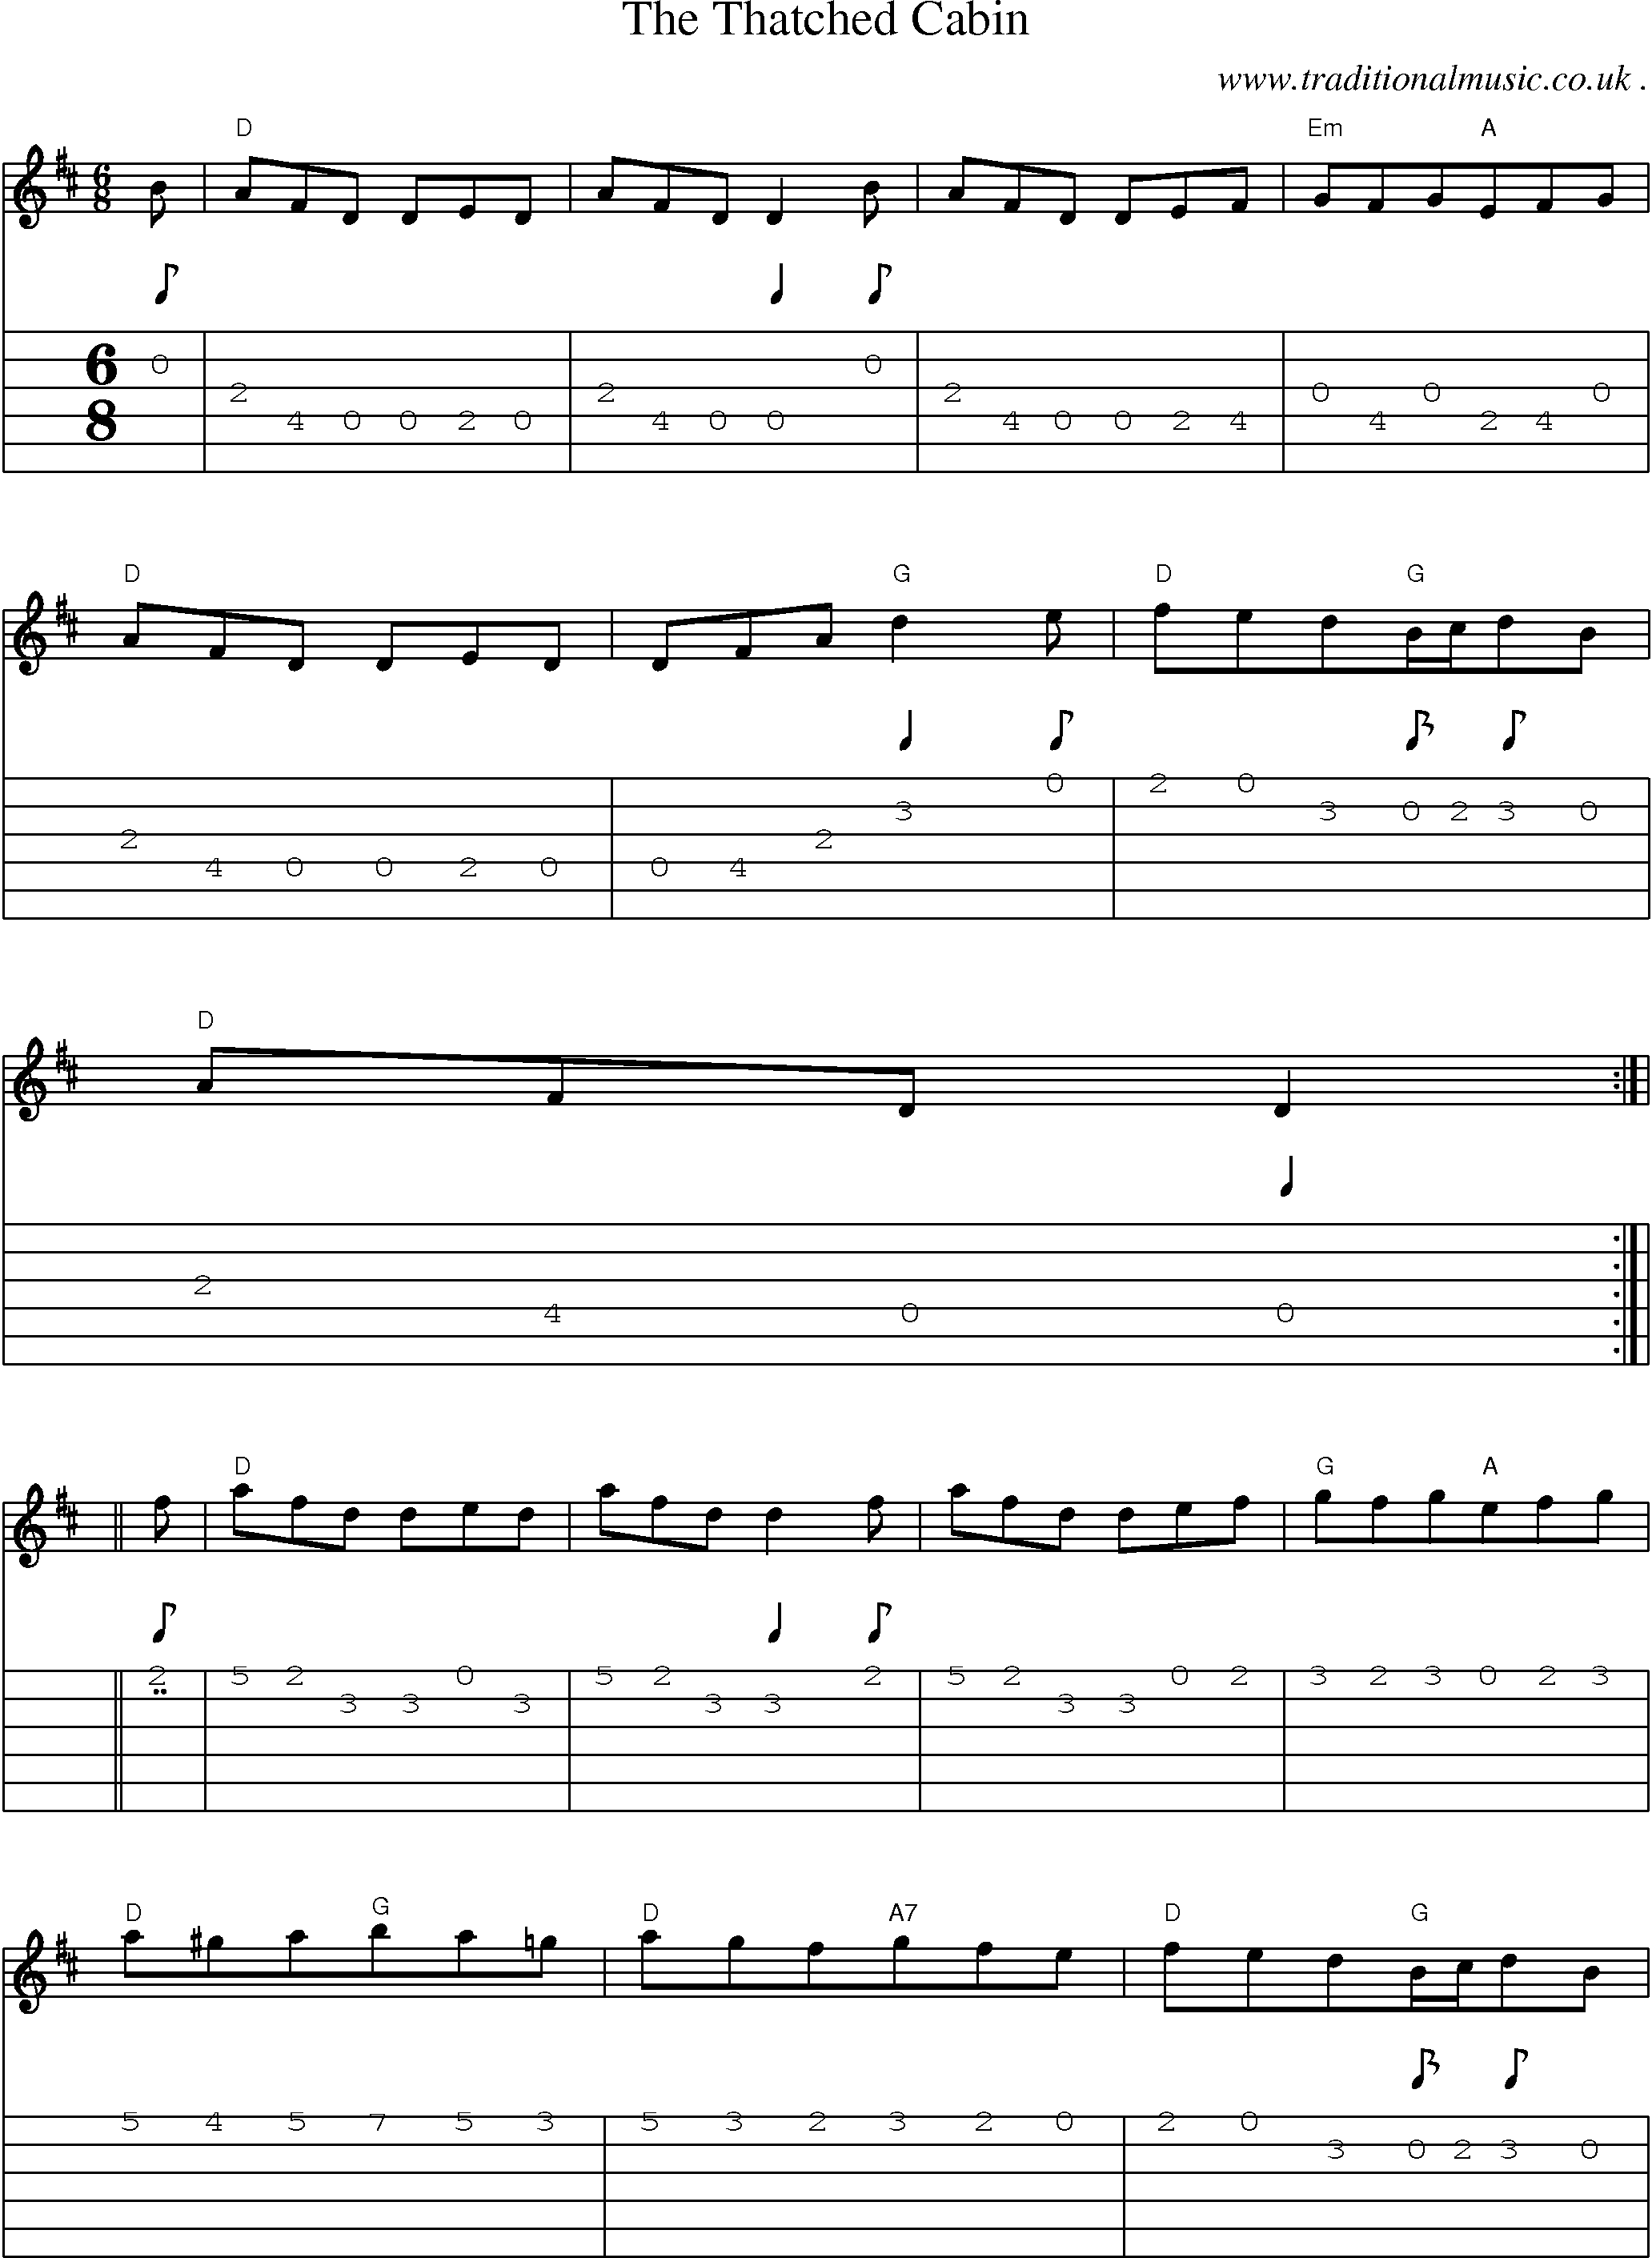 Sheet-Music and Guitar Tabs for The Thatched Cabin